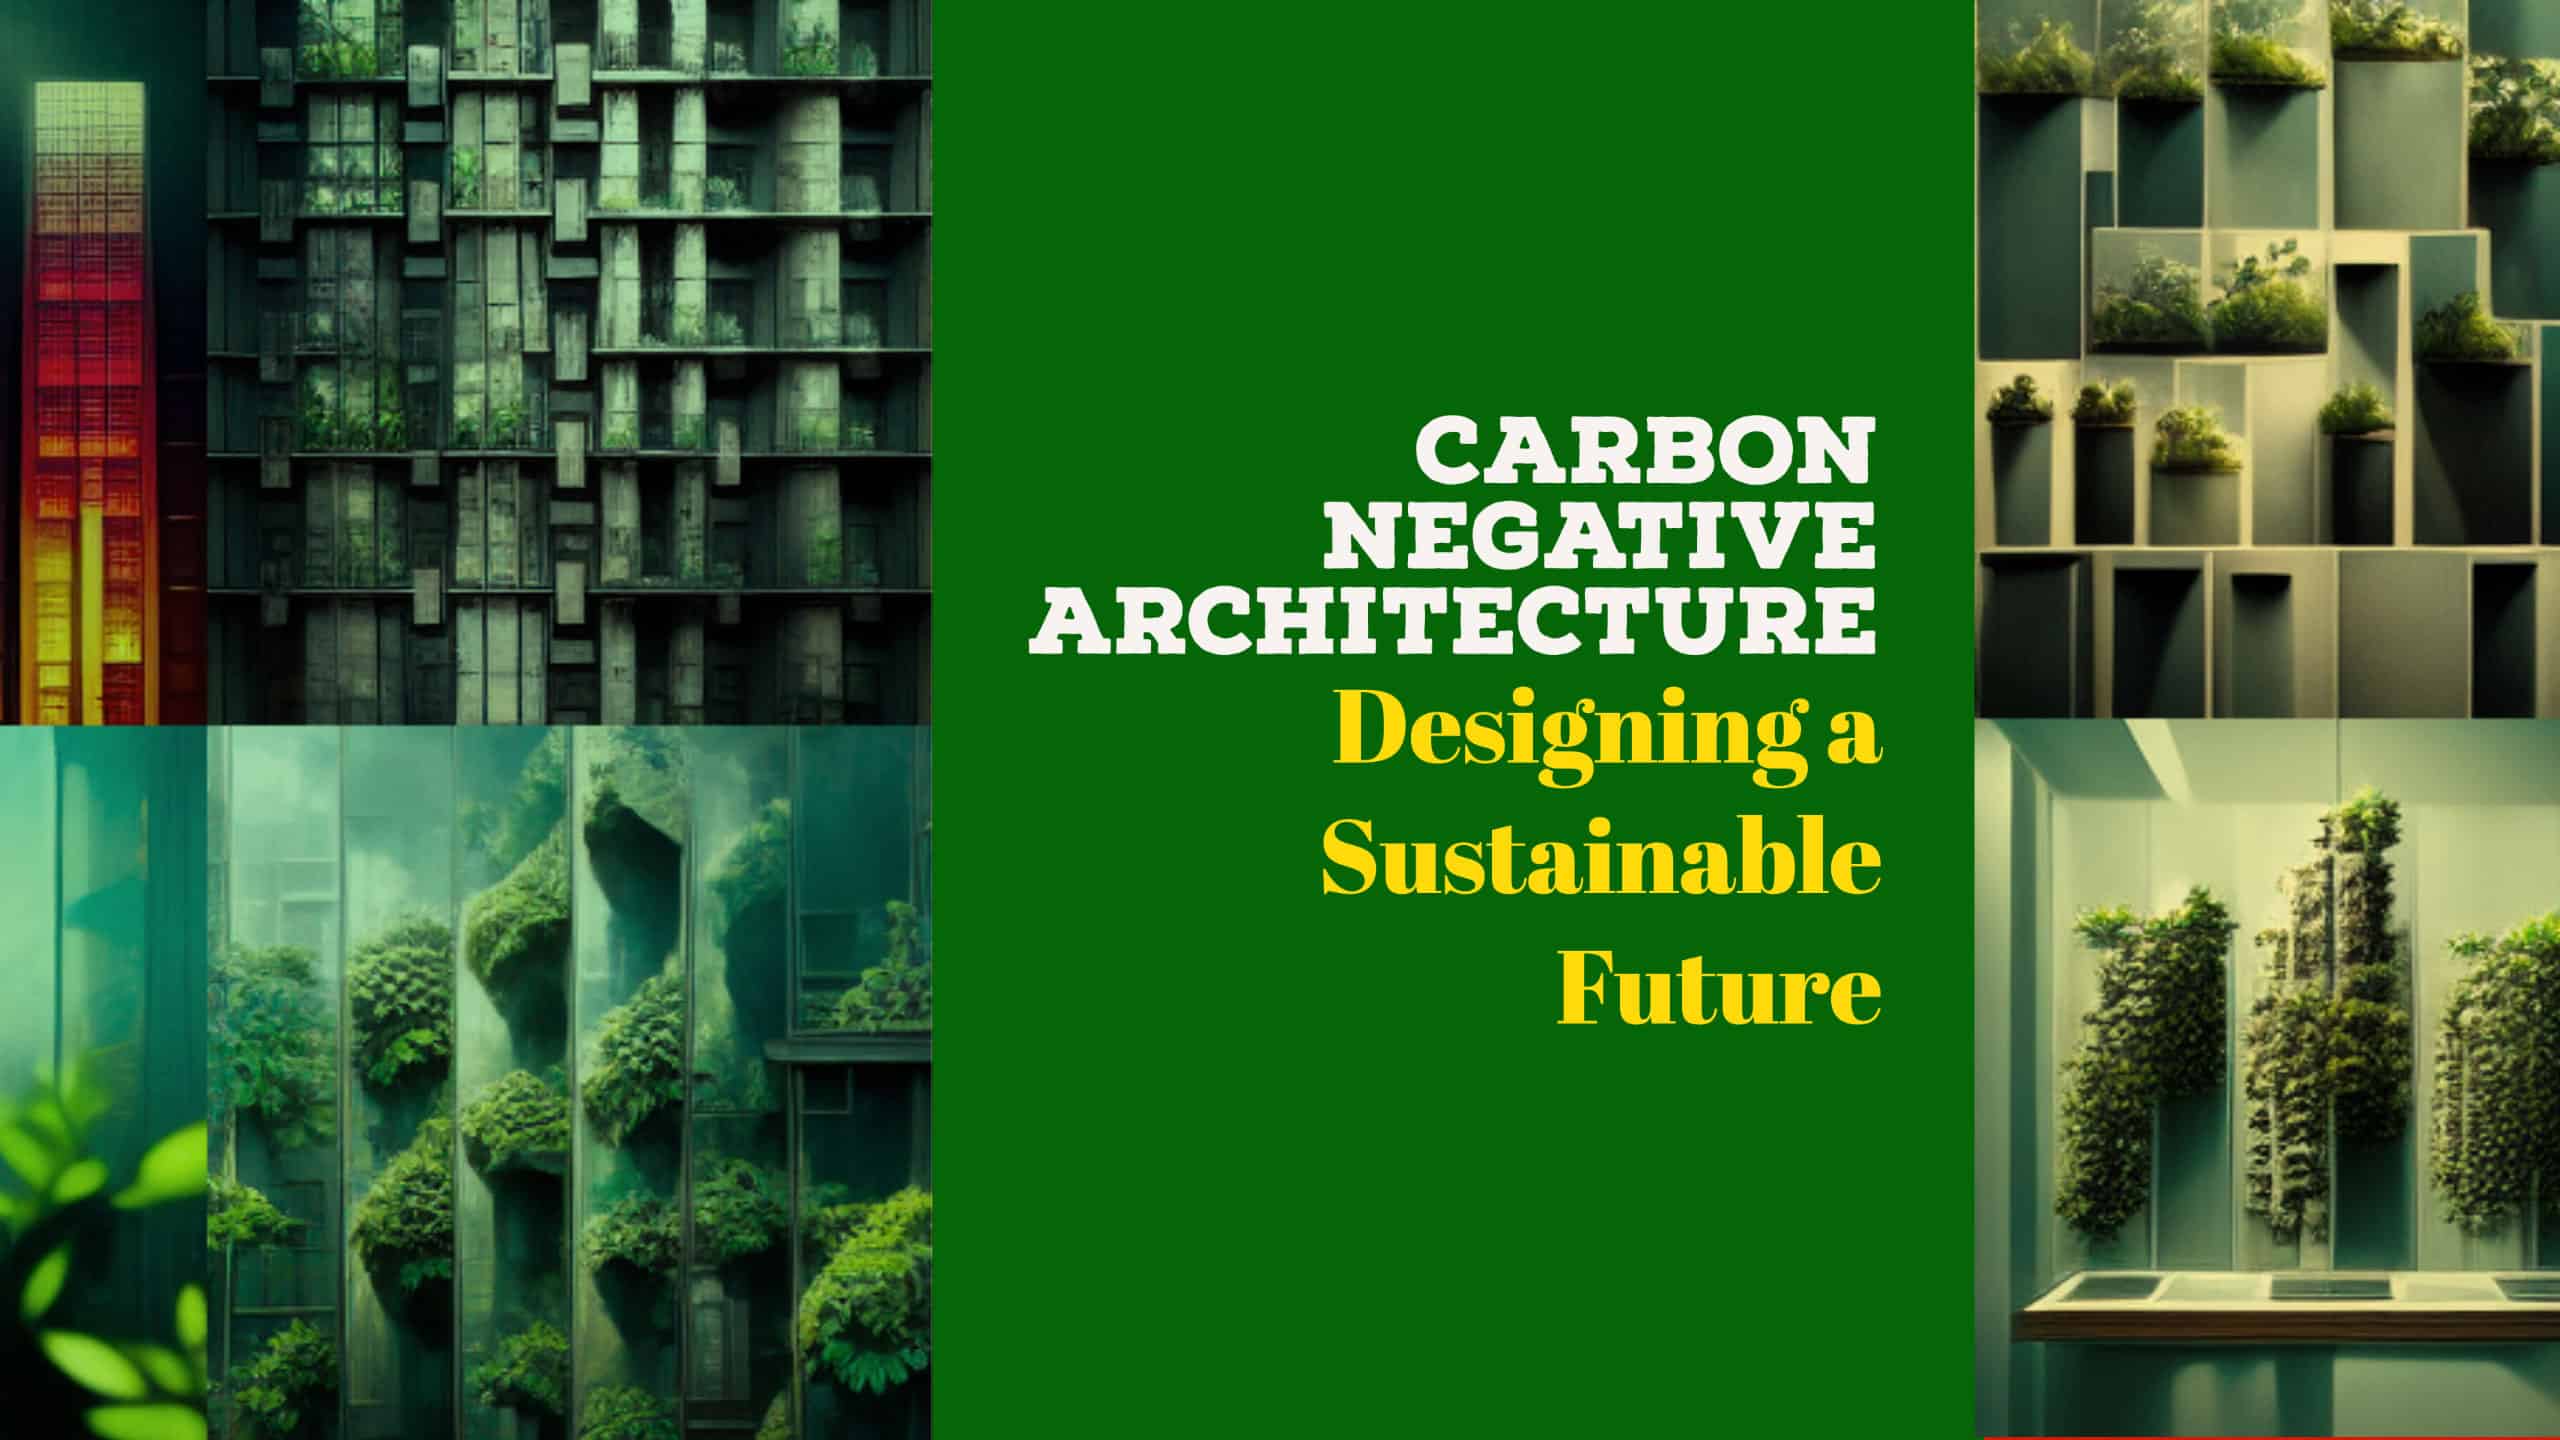 Carbon-Negative Architecture: Designing a Sustainable Future